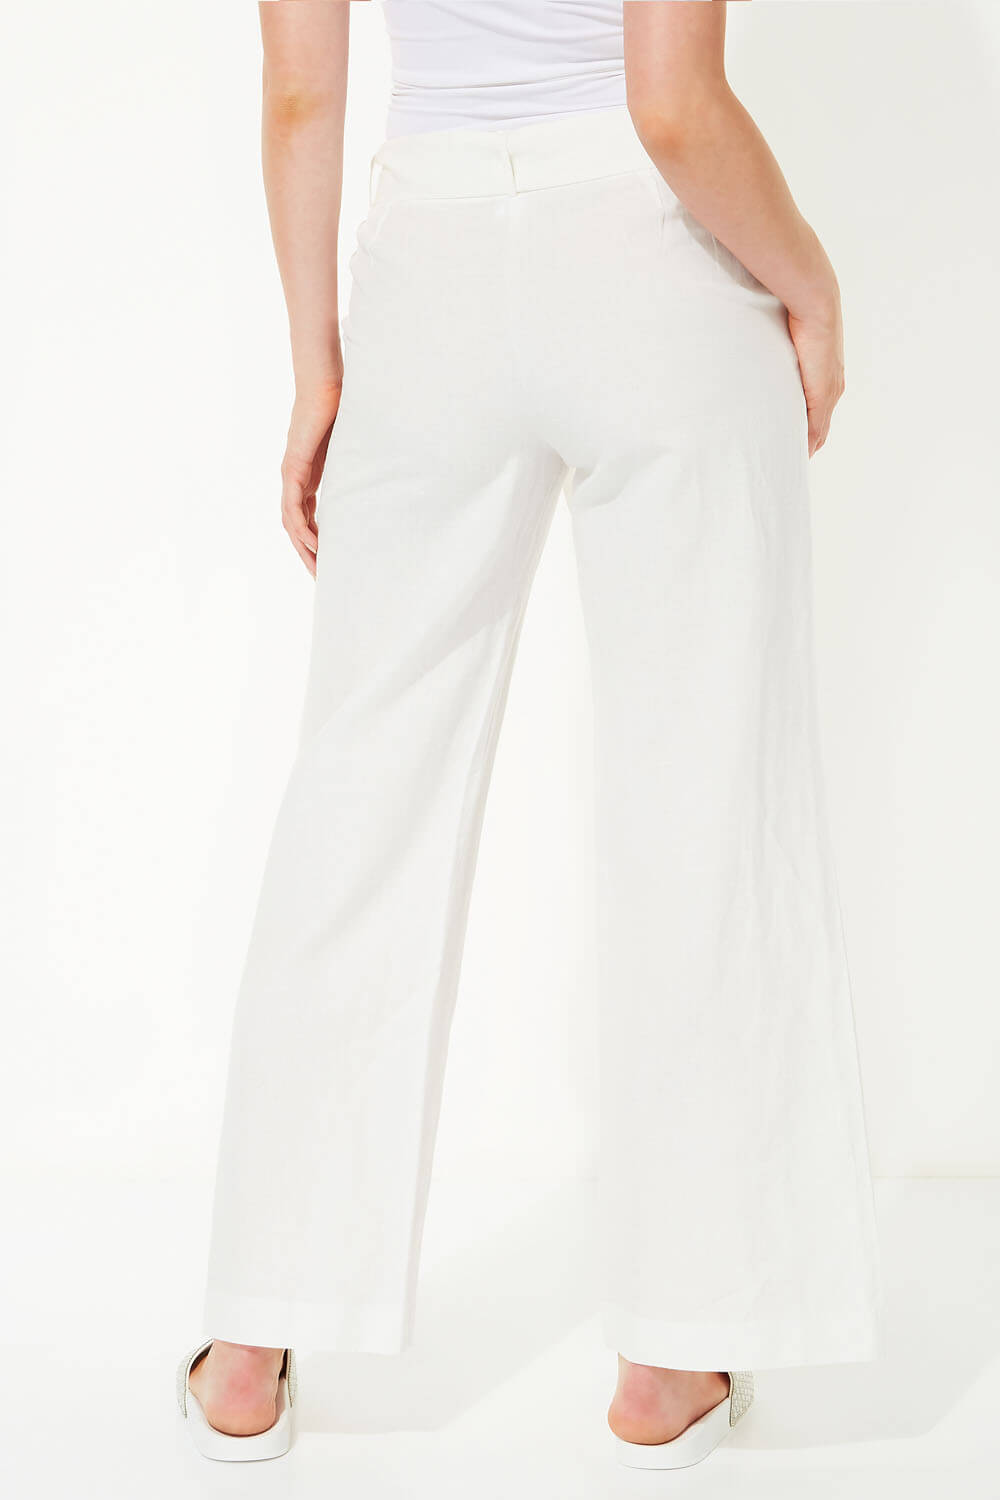 White Linen Wide Leg Trousers, Image 2 of 4